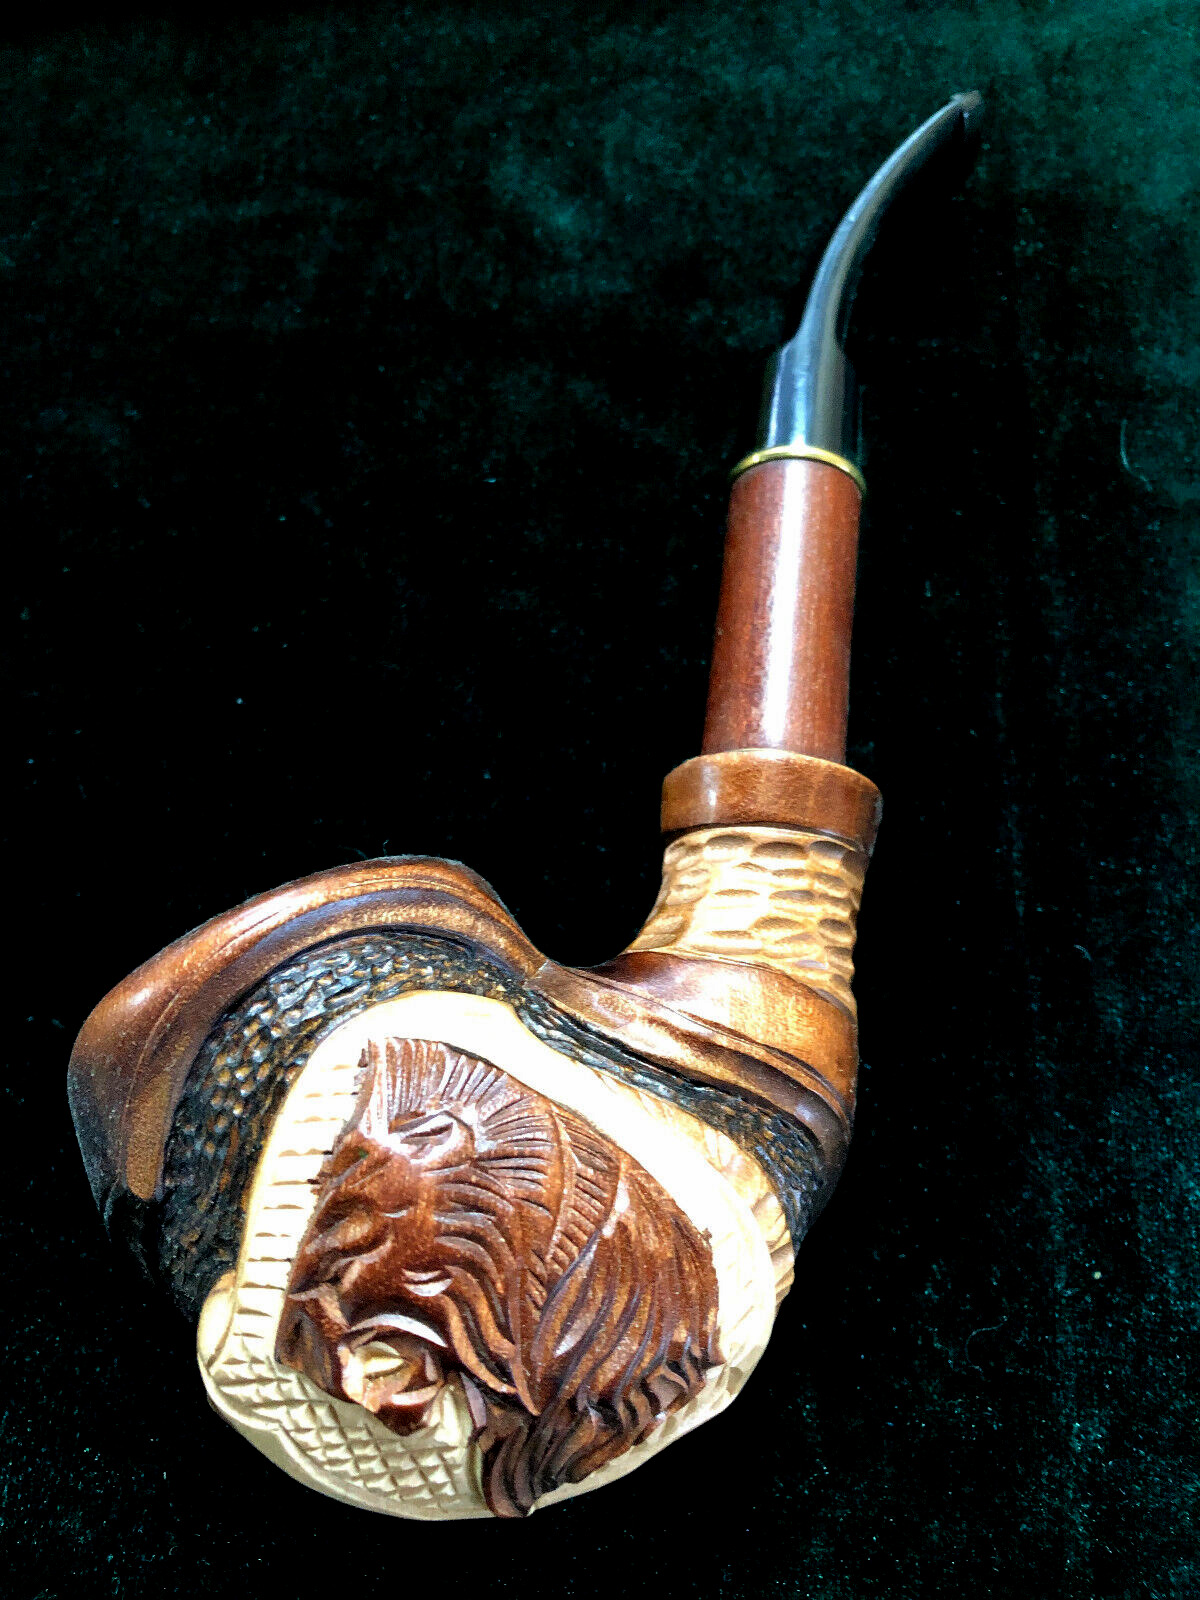 Wooden Tobacco Smoking Pipe - Handcrafted from solid wood - Tiger, Lion